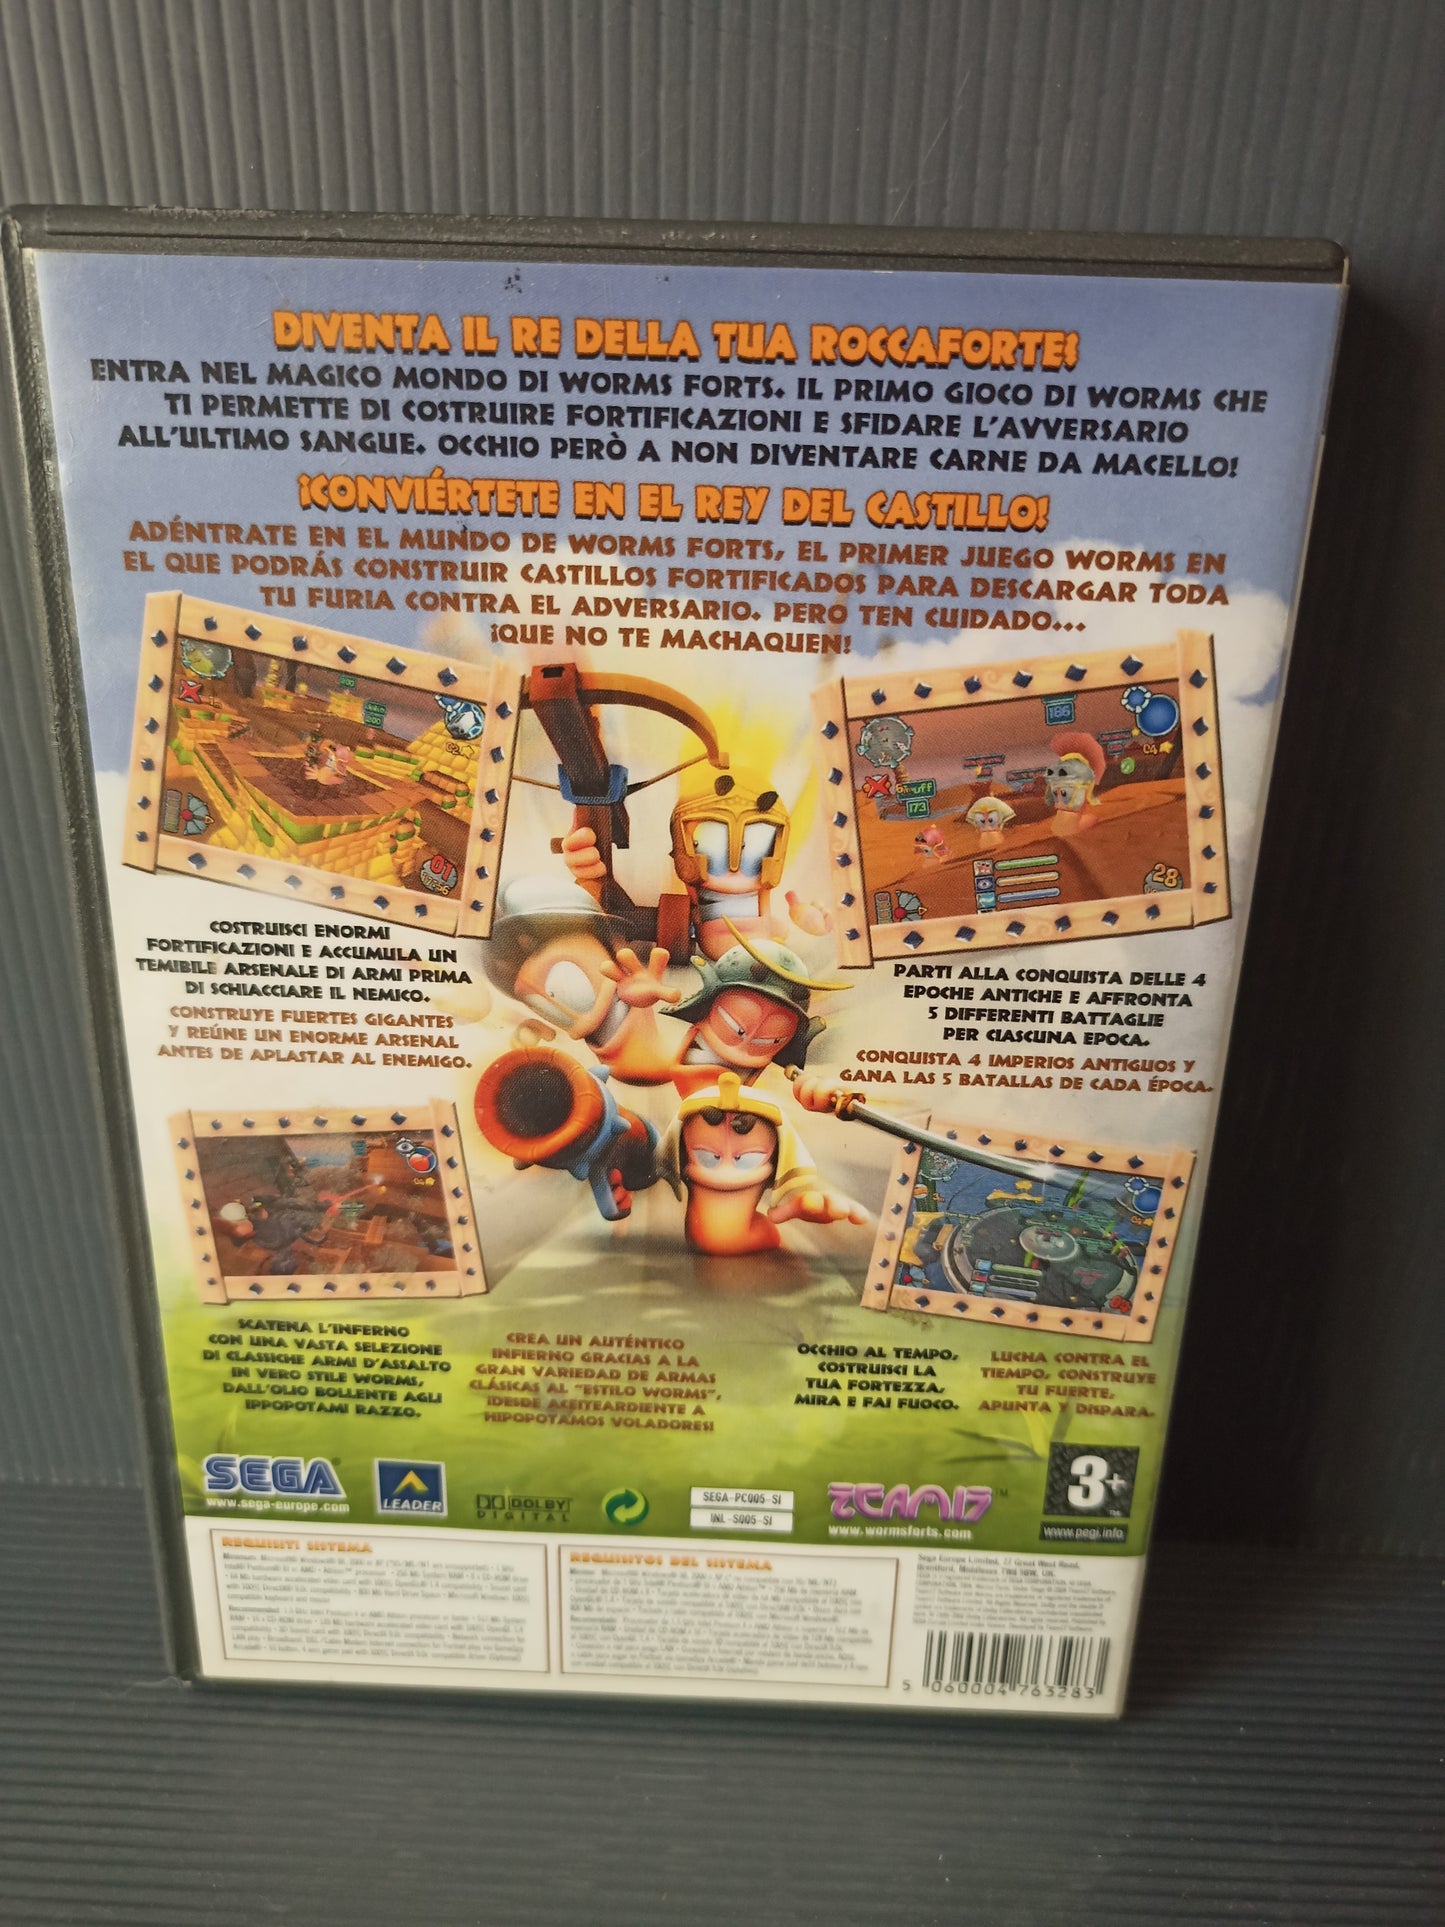 Worms Forts Under Siege PC video game